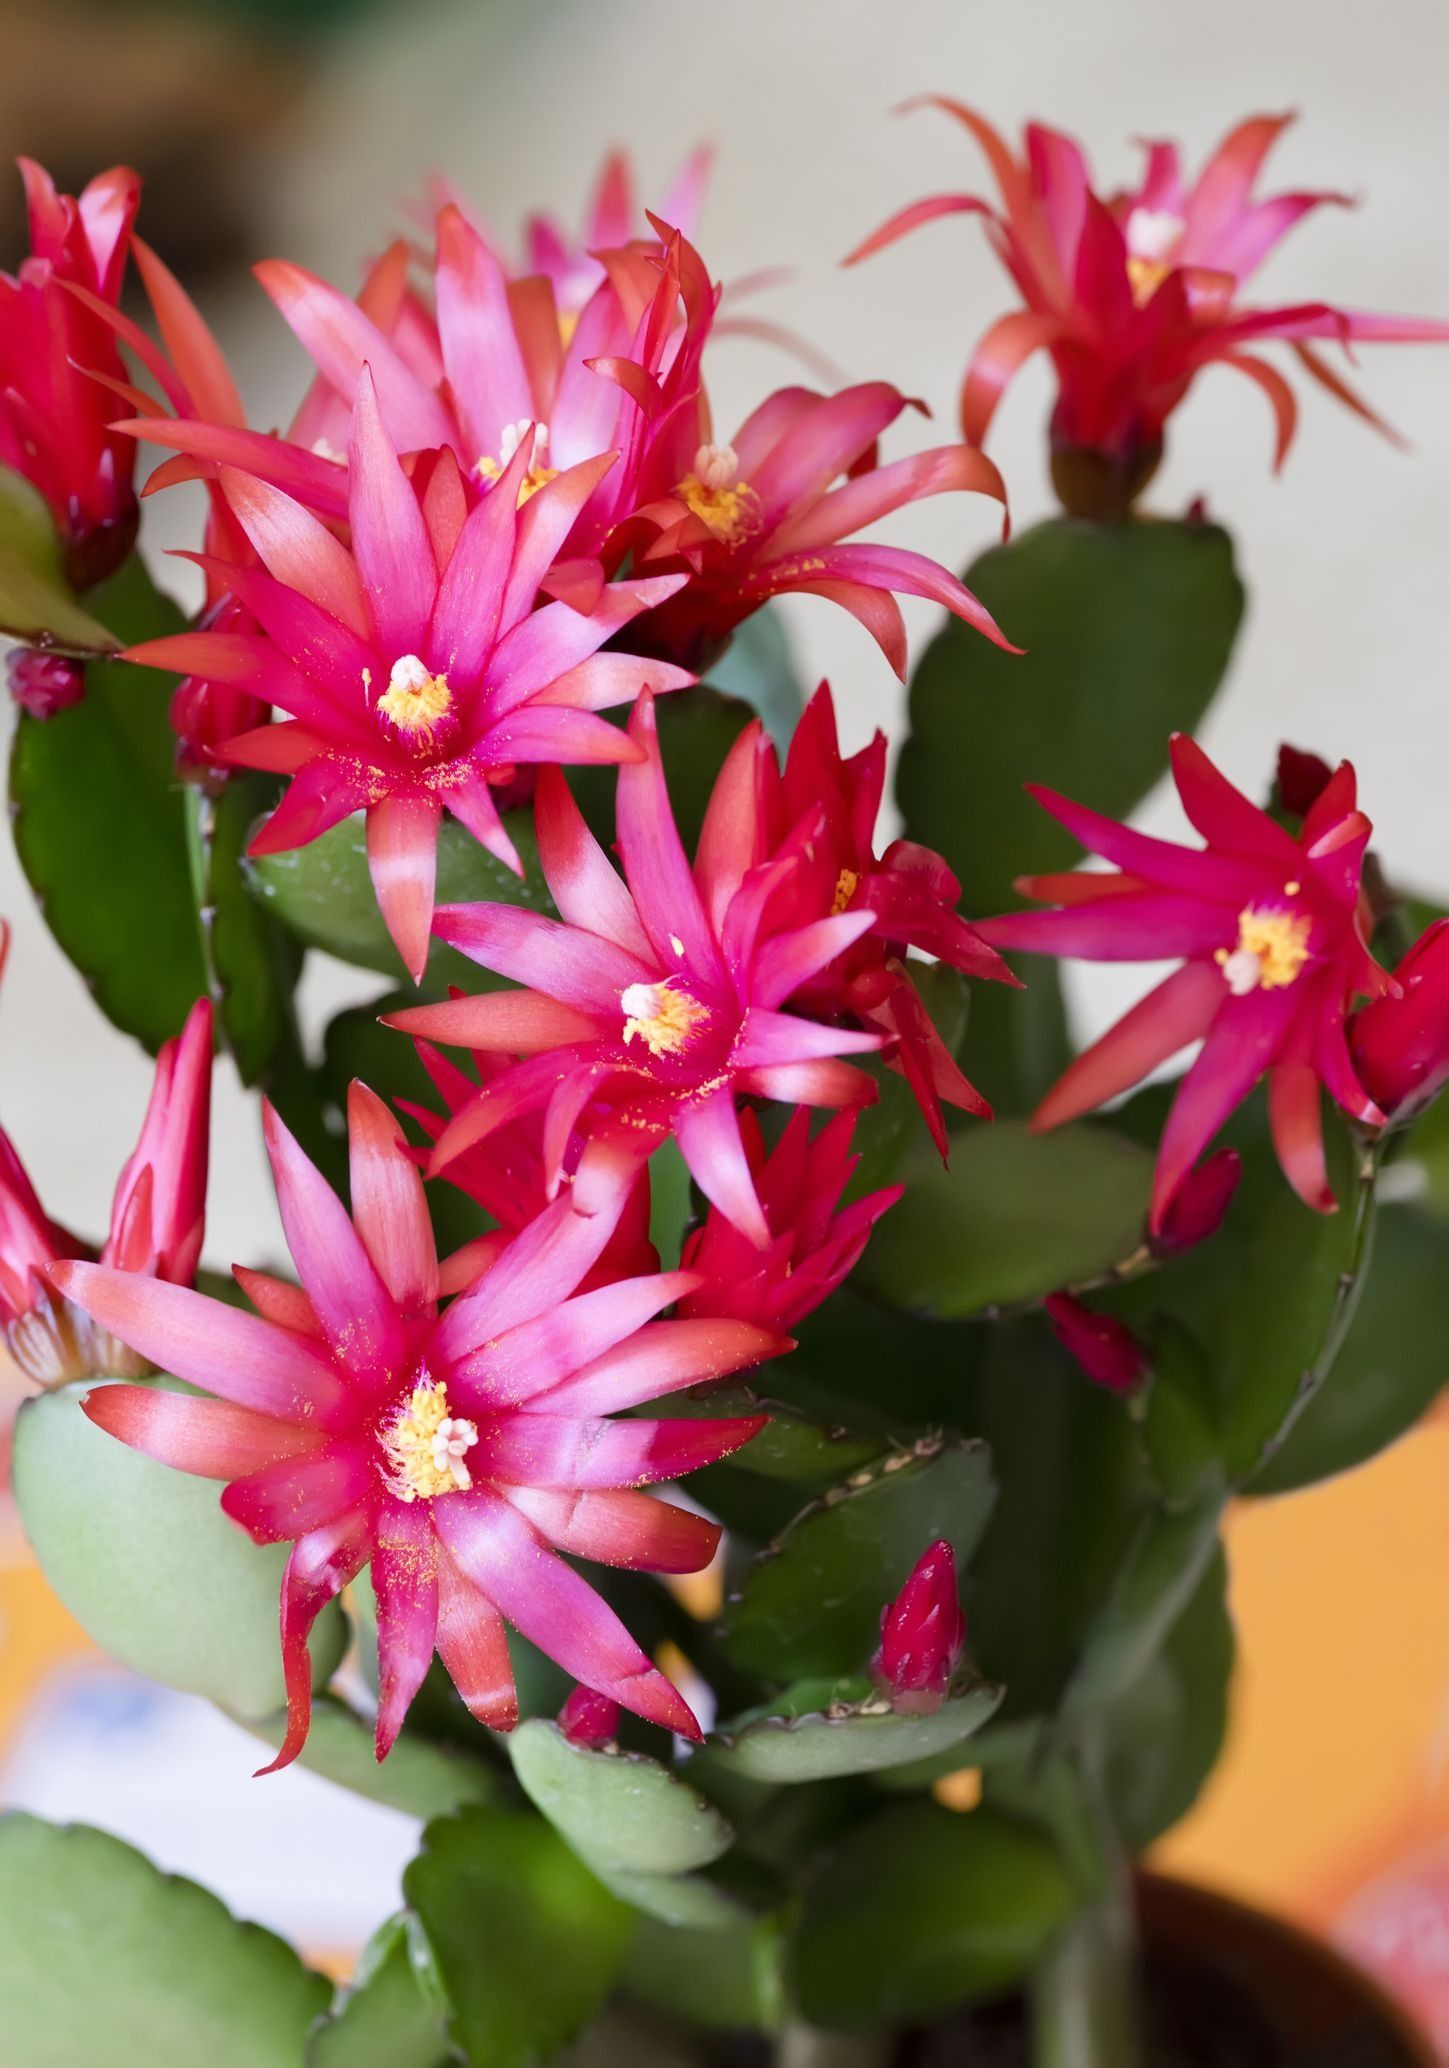 potted easter cactus, with plump round leaf segments, covered in bright pinkish red flowers